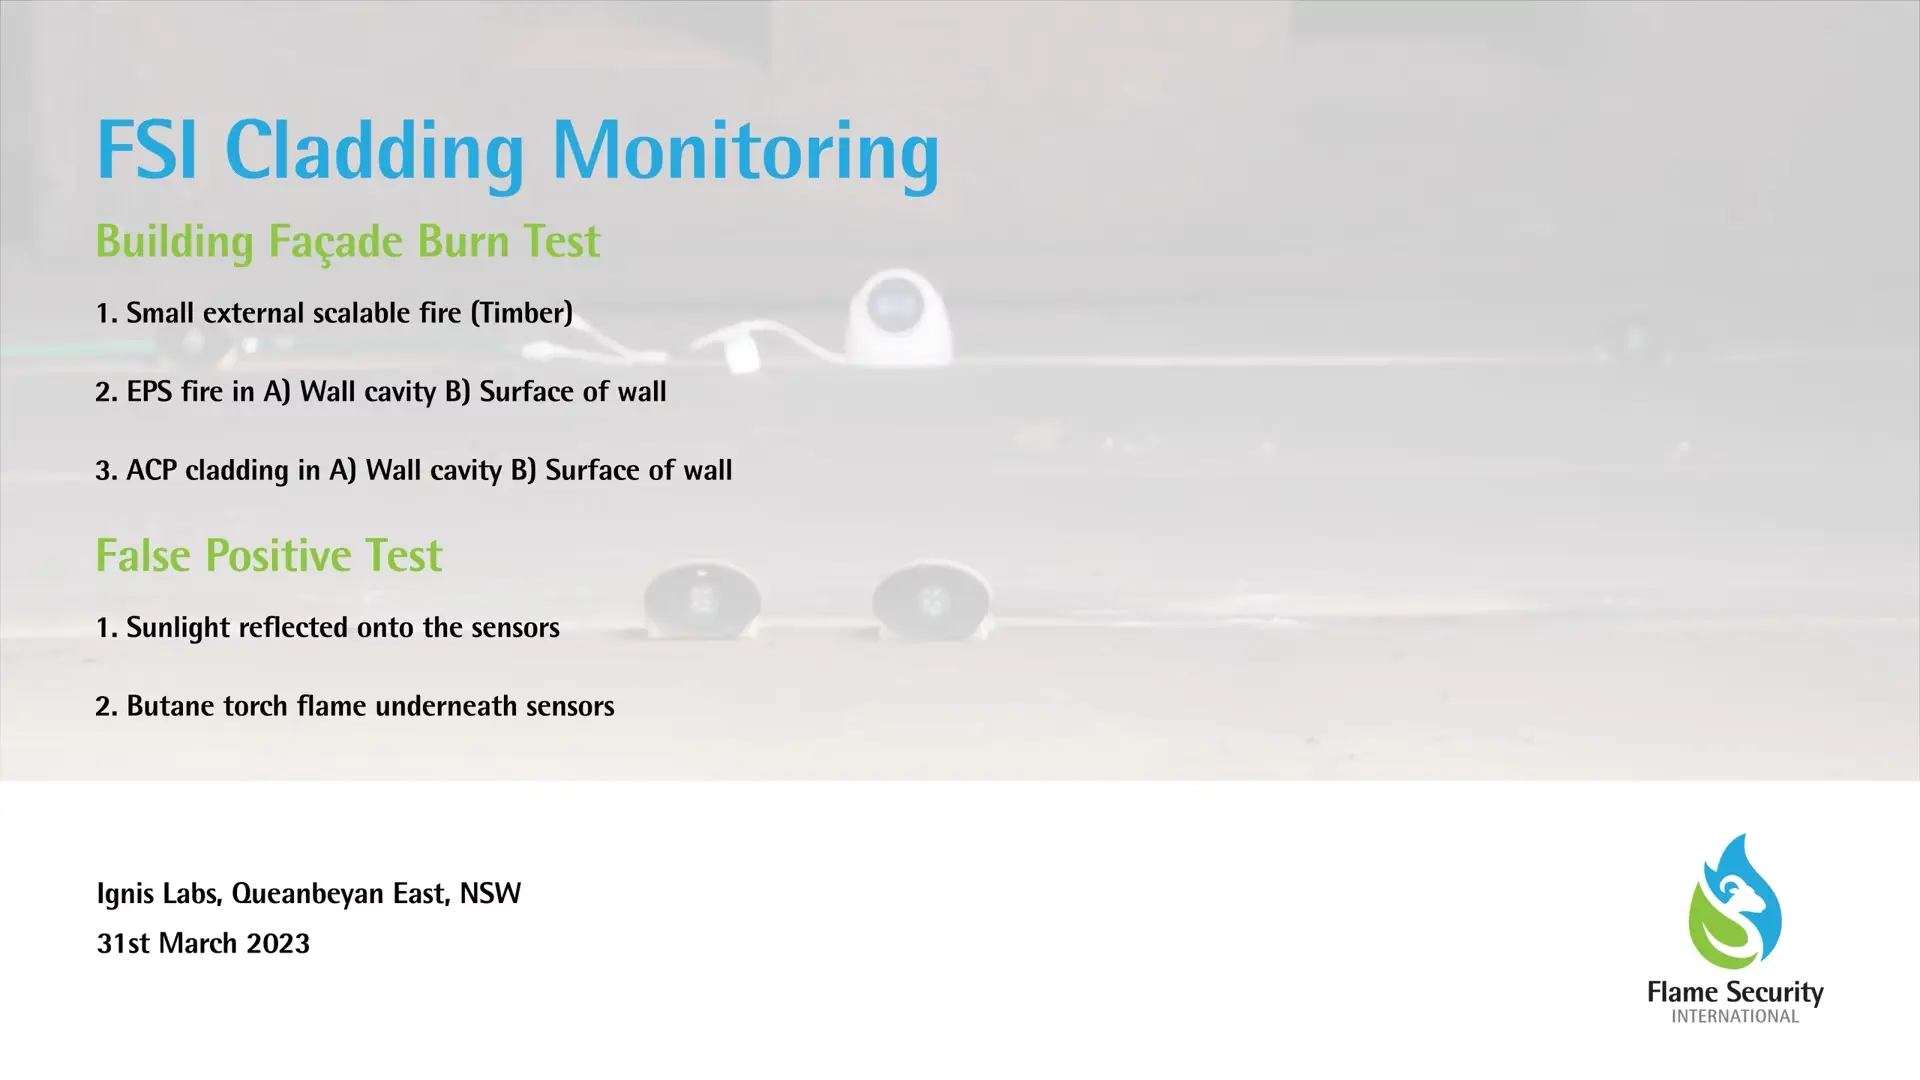 FSI Cladding Monitoring System at Ignis Labs